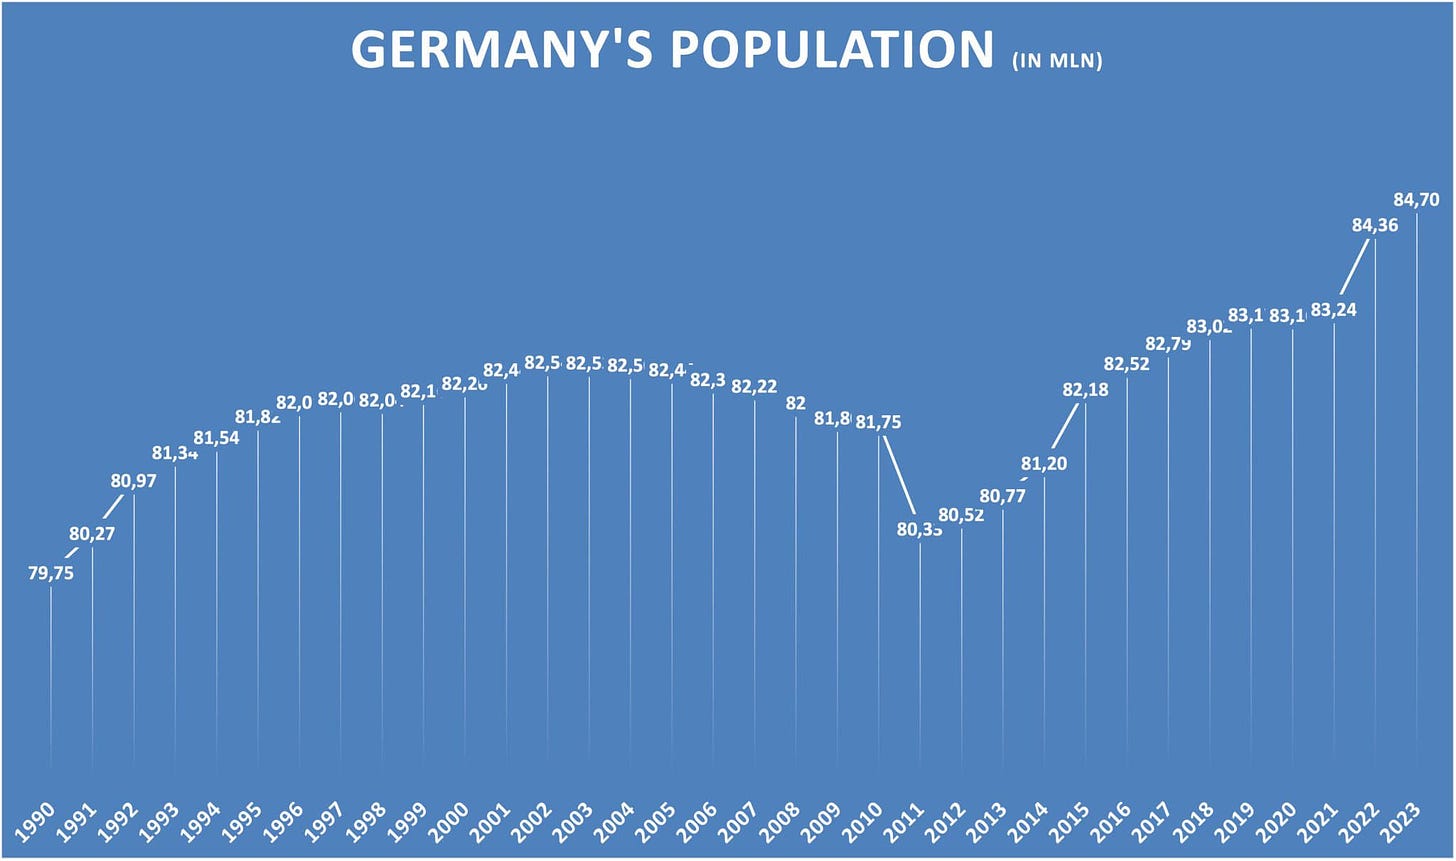 May be a graphic of map and text that says 'GERMANY'S POPULATION (IN MLN) 84,70 84,36 81,8 82,0 82,0 82,0 82,1 82,2u 82,4 82,5 82,5 82,5 82,4 82,3 82,22 82 81,8 81,75 81,54 81,34 80,97 80,27 83,083,183,183,24 83,0 83,1 83,1 83,24 82,7y 82,52 82,18 79,75 81,20 80,77 80,52 80,3 1990 1991 1992 1994 1995 1996 1997 1998 1999 2000 2001 2002 2003 2004 2005 2006 2007 2008 2009 2010 2011 2013 2014 2015 2016 2017 2018 2019 2020 2021 2022 2023'